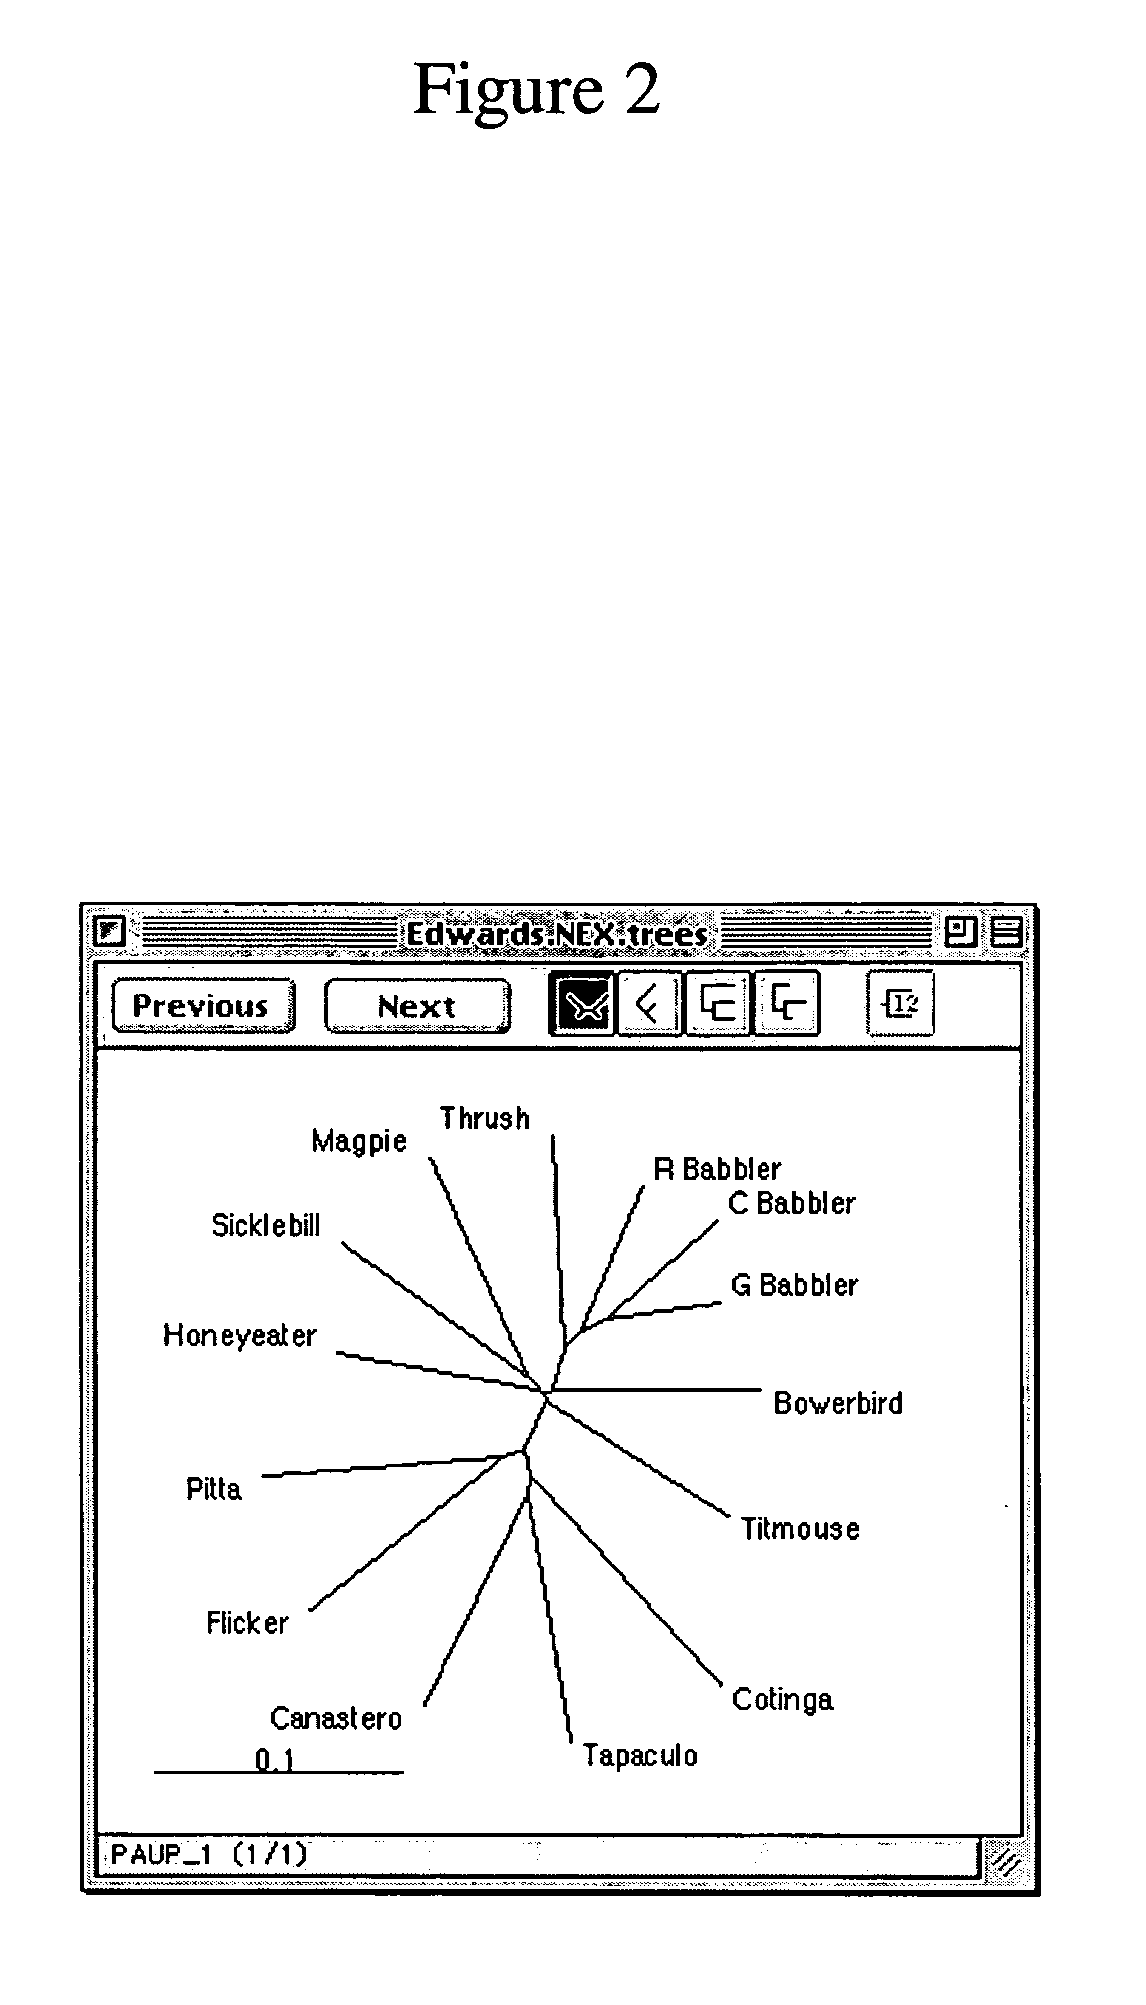 Methods and systems for technology analysis and mapping